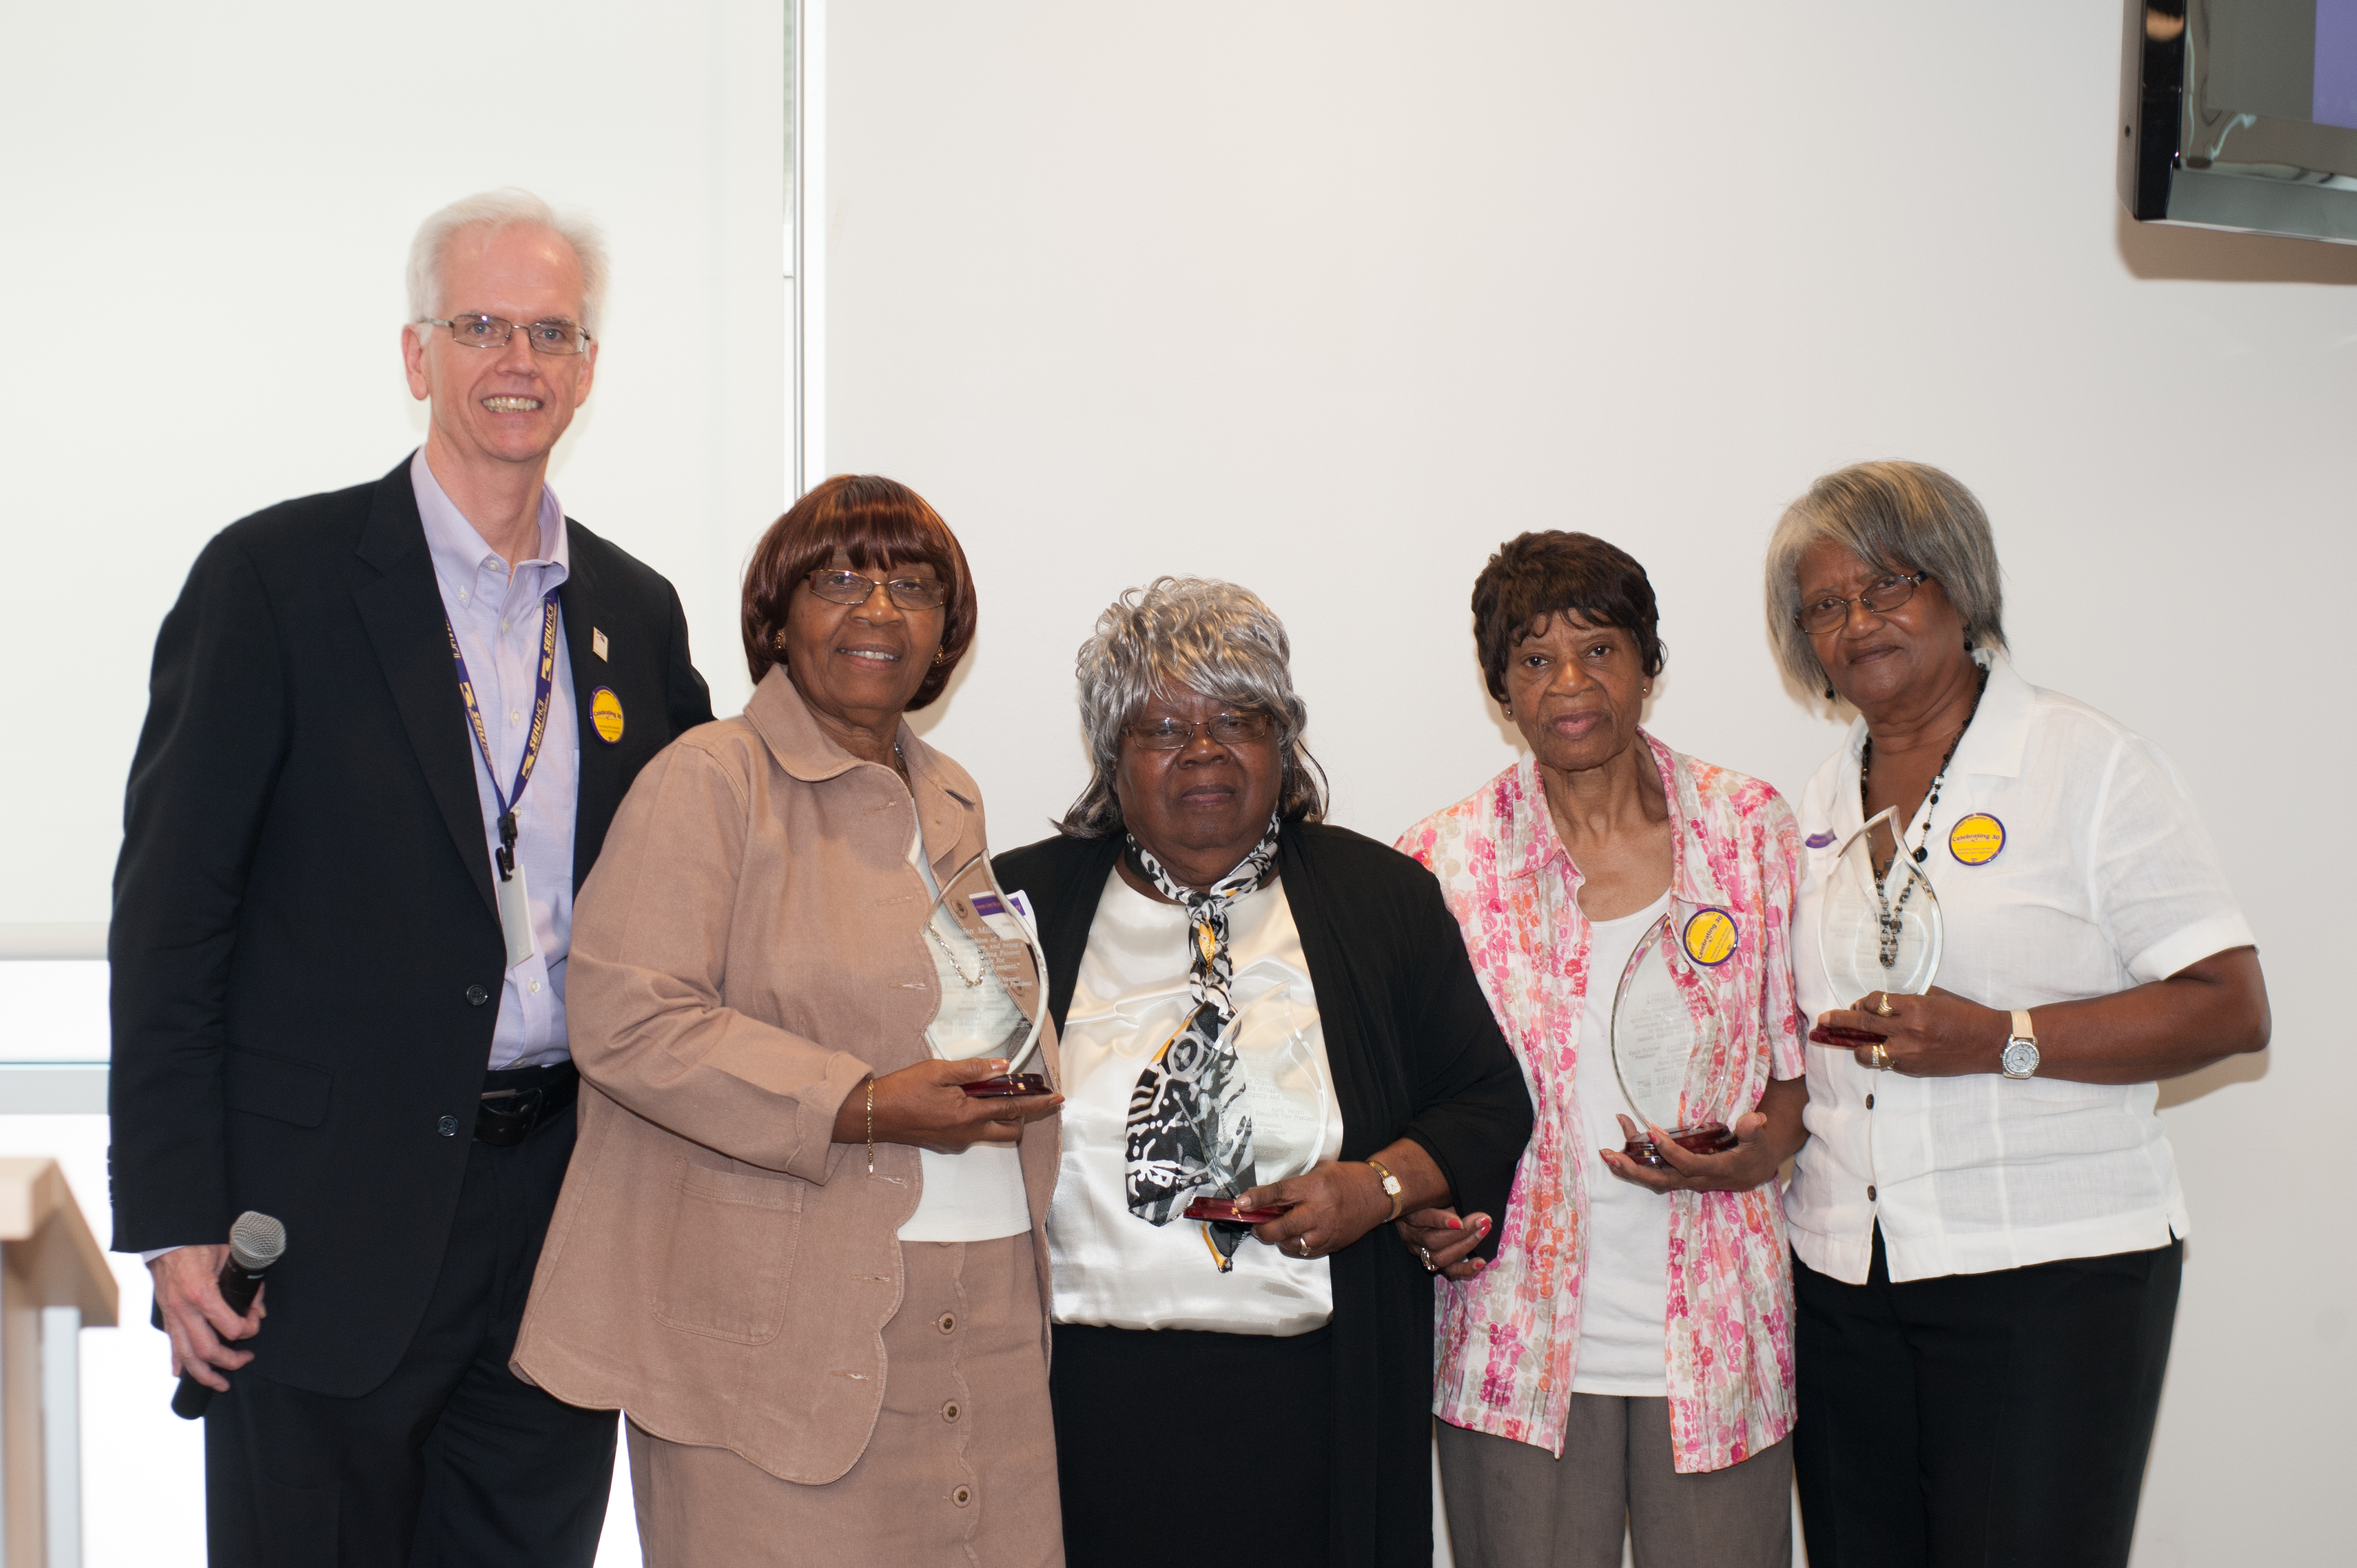 Home care pioneers received awards for a lifetime of service to seniors and people with disabilities.